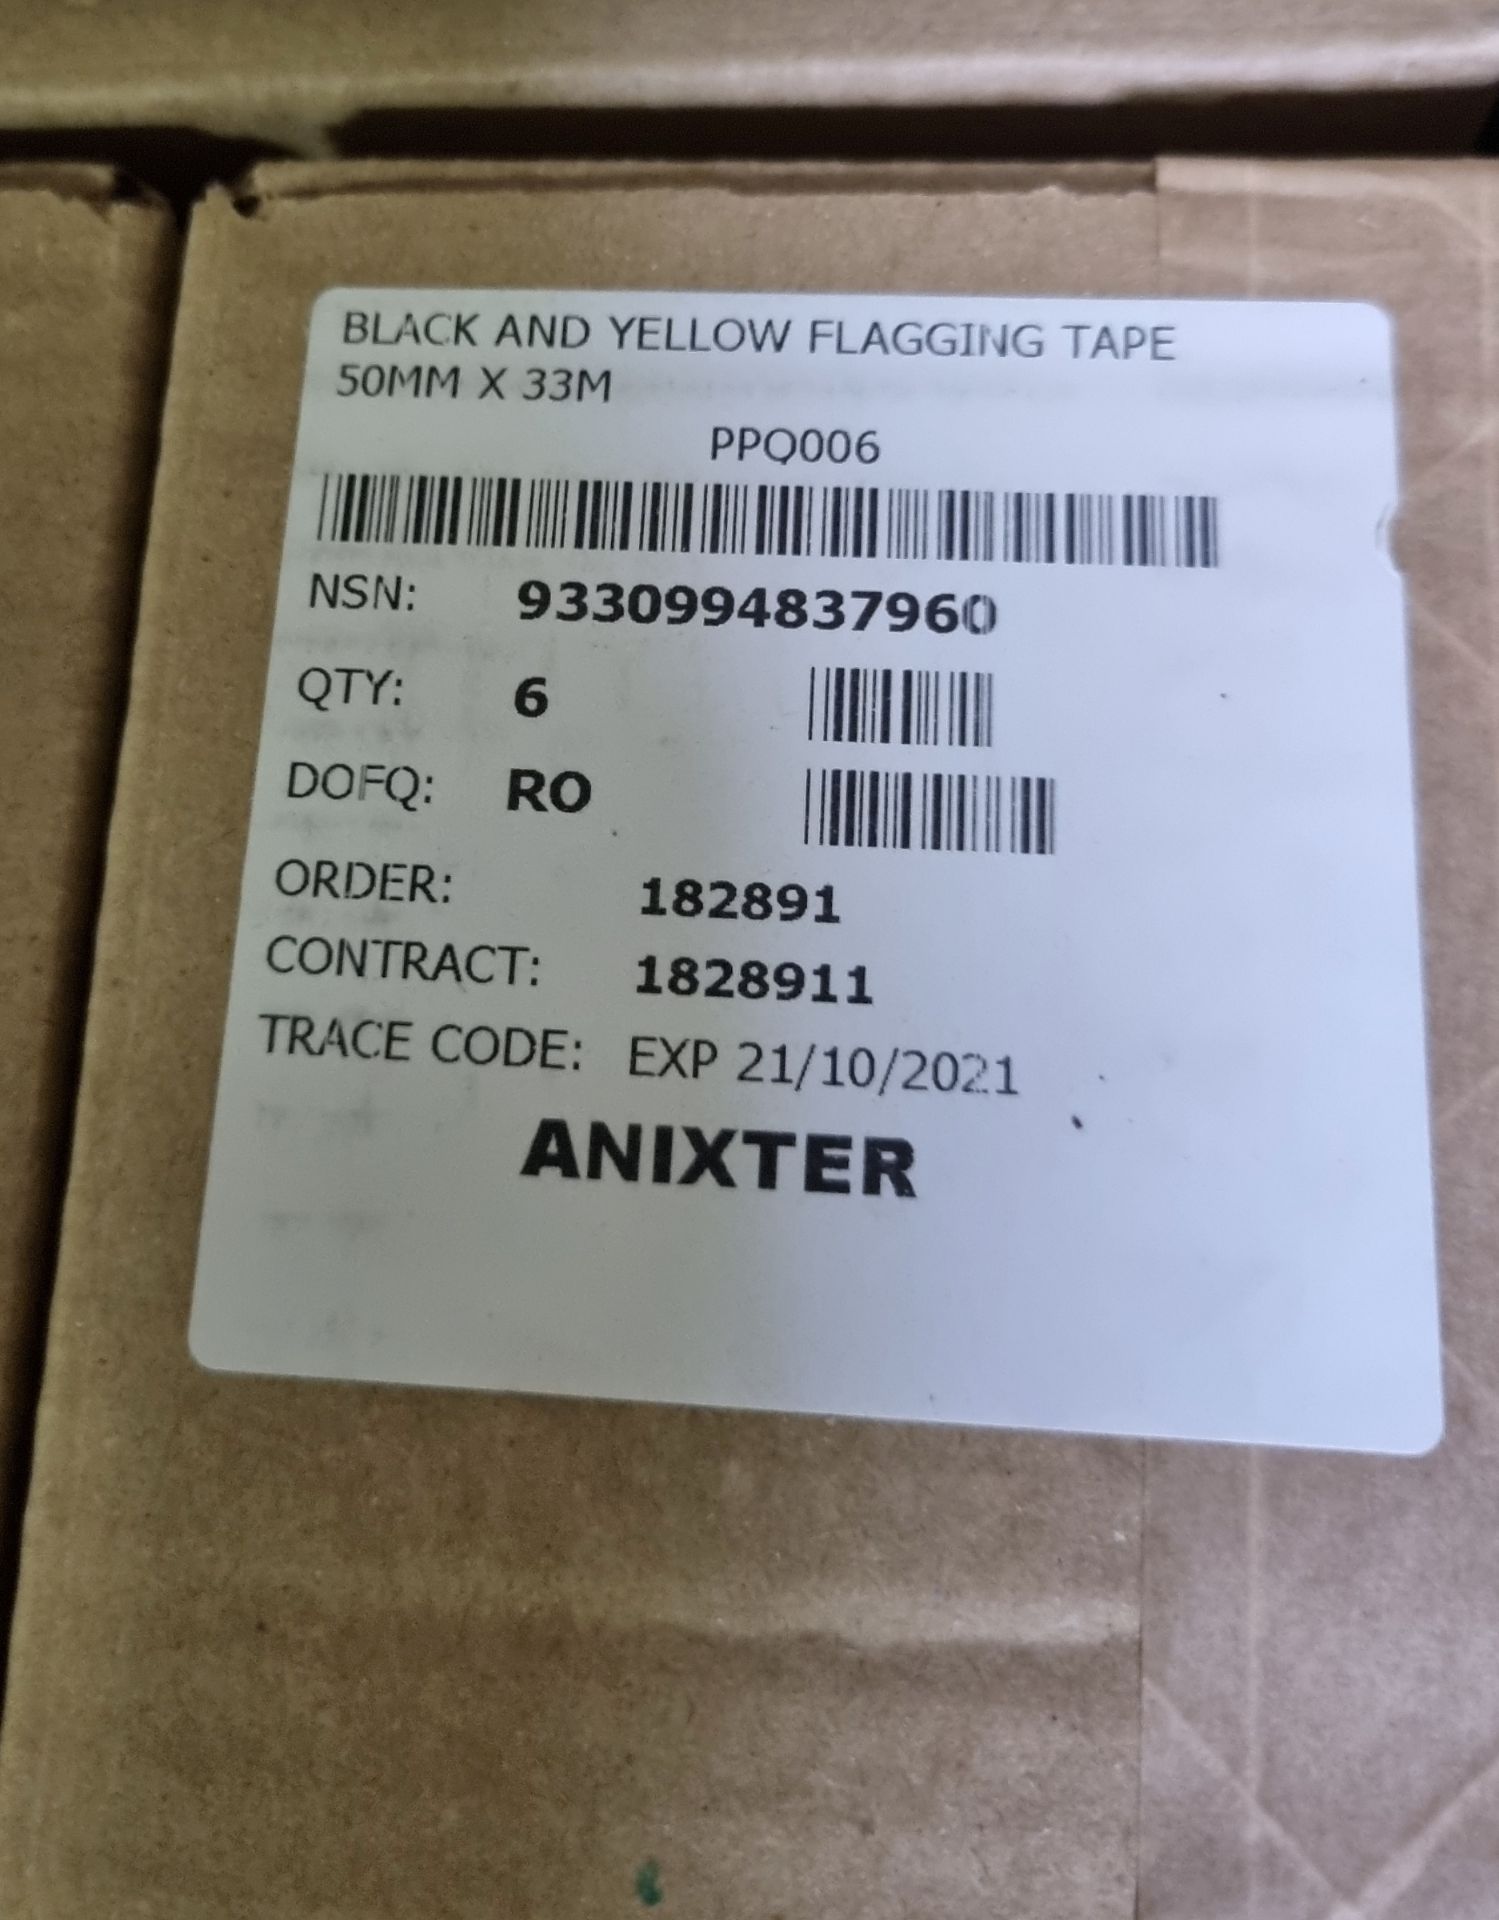 Black and Yellow flagging tape 50mm x 33M - 6 per box - 30 boxes - Image 3 of 3